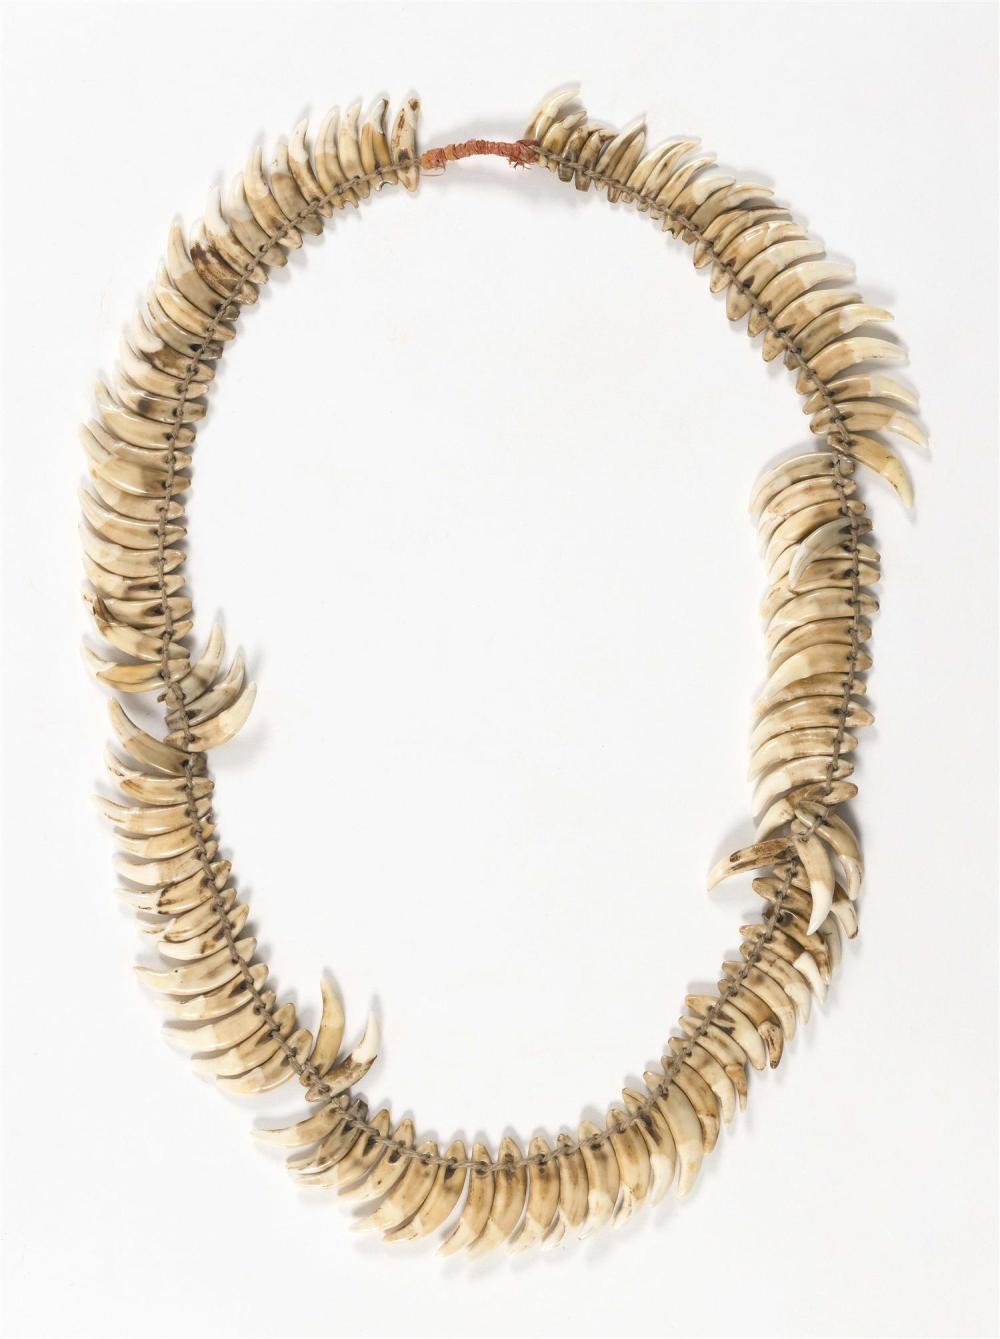 CEREMONIAL OR TROPHY TOOTH NECKLACE 34d3d4